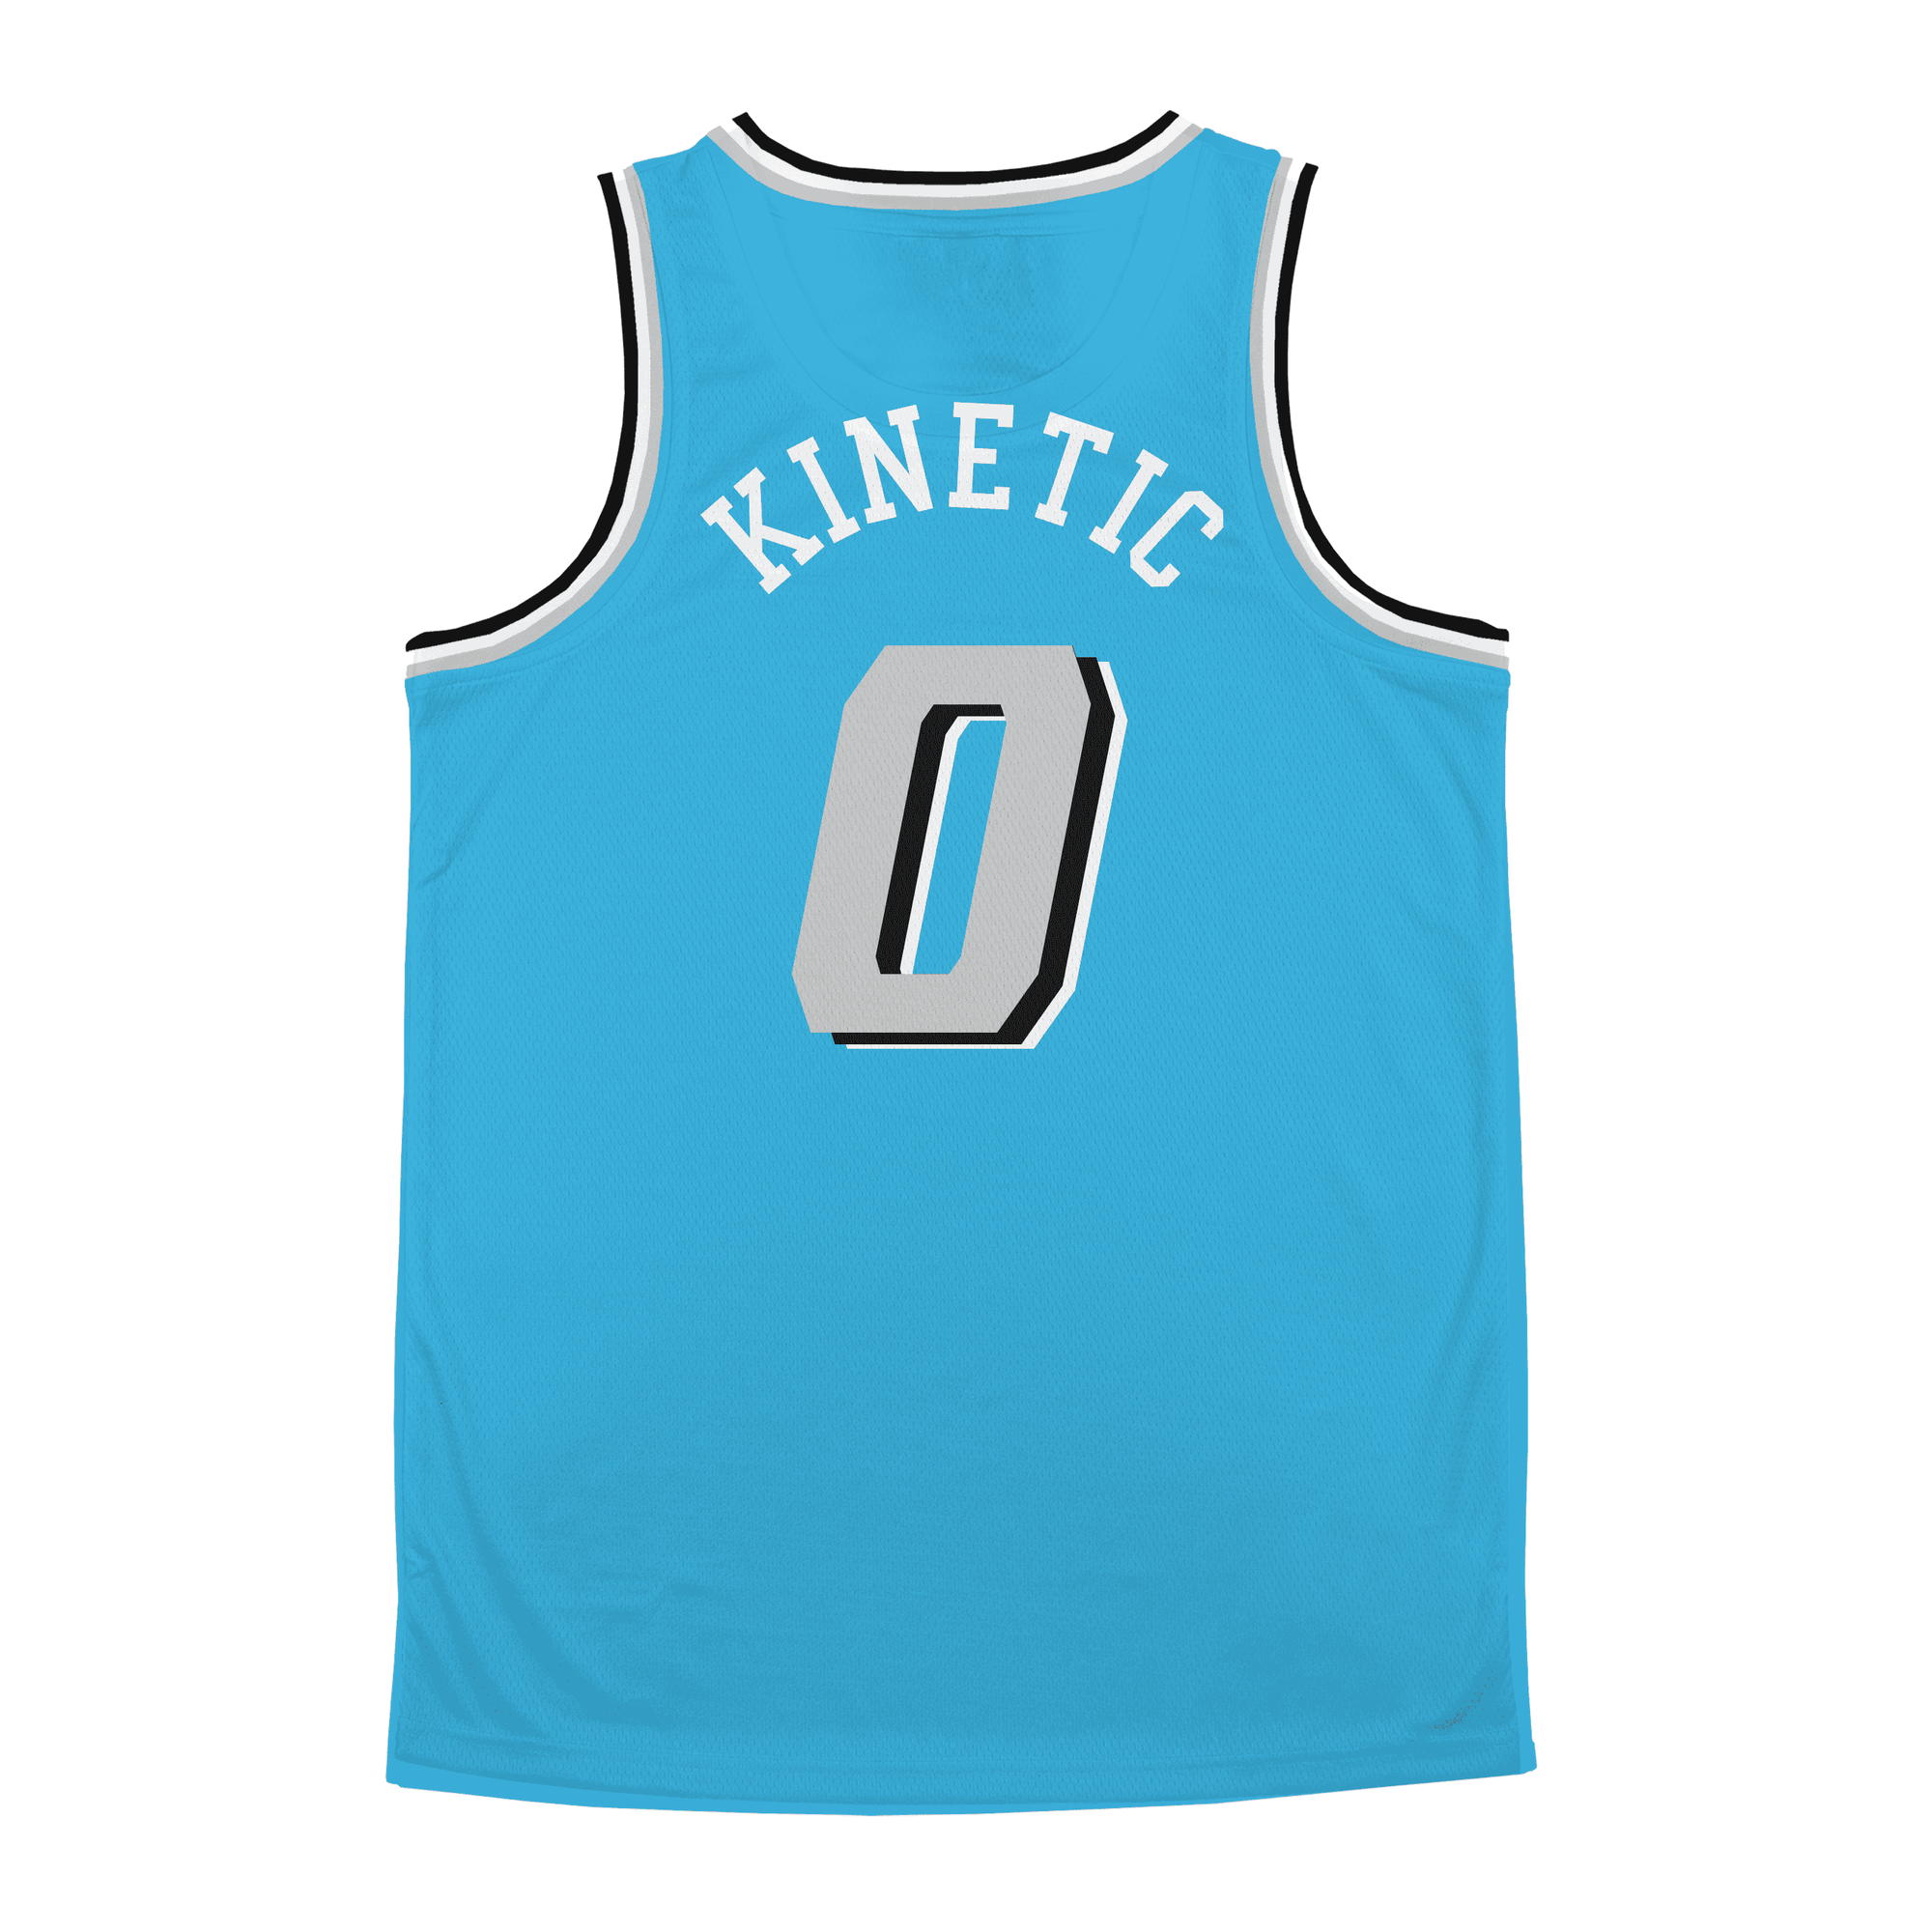 Delta Sigma Phi - Pacific Mist Basketball Jersey